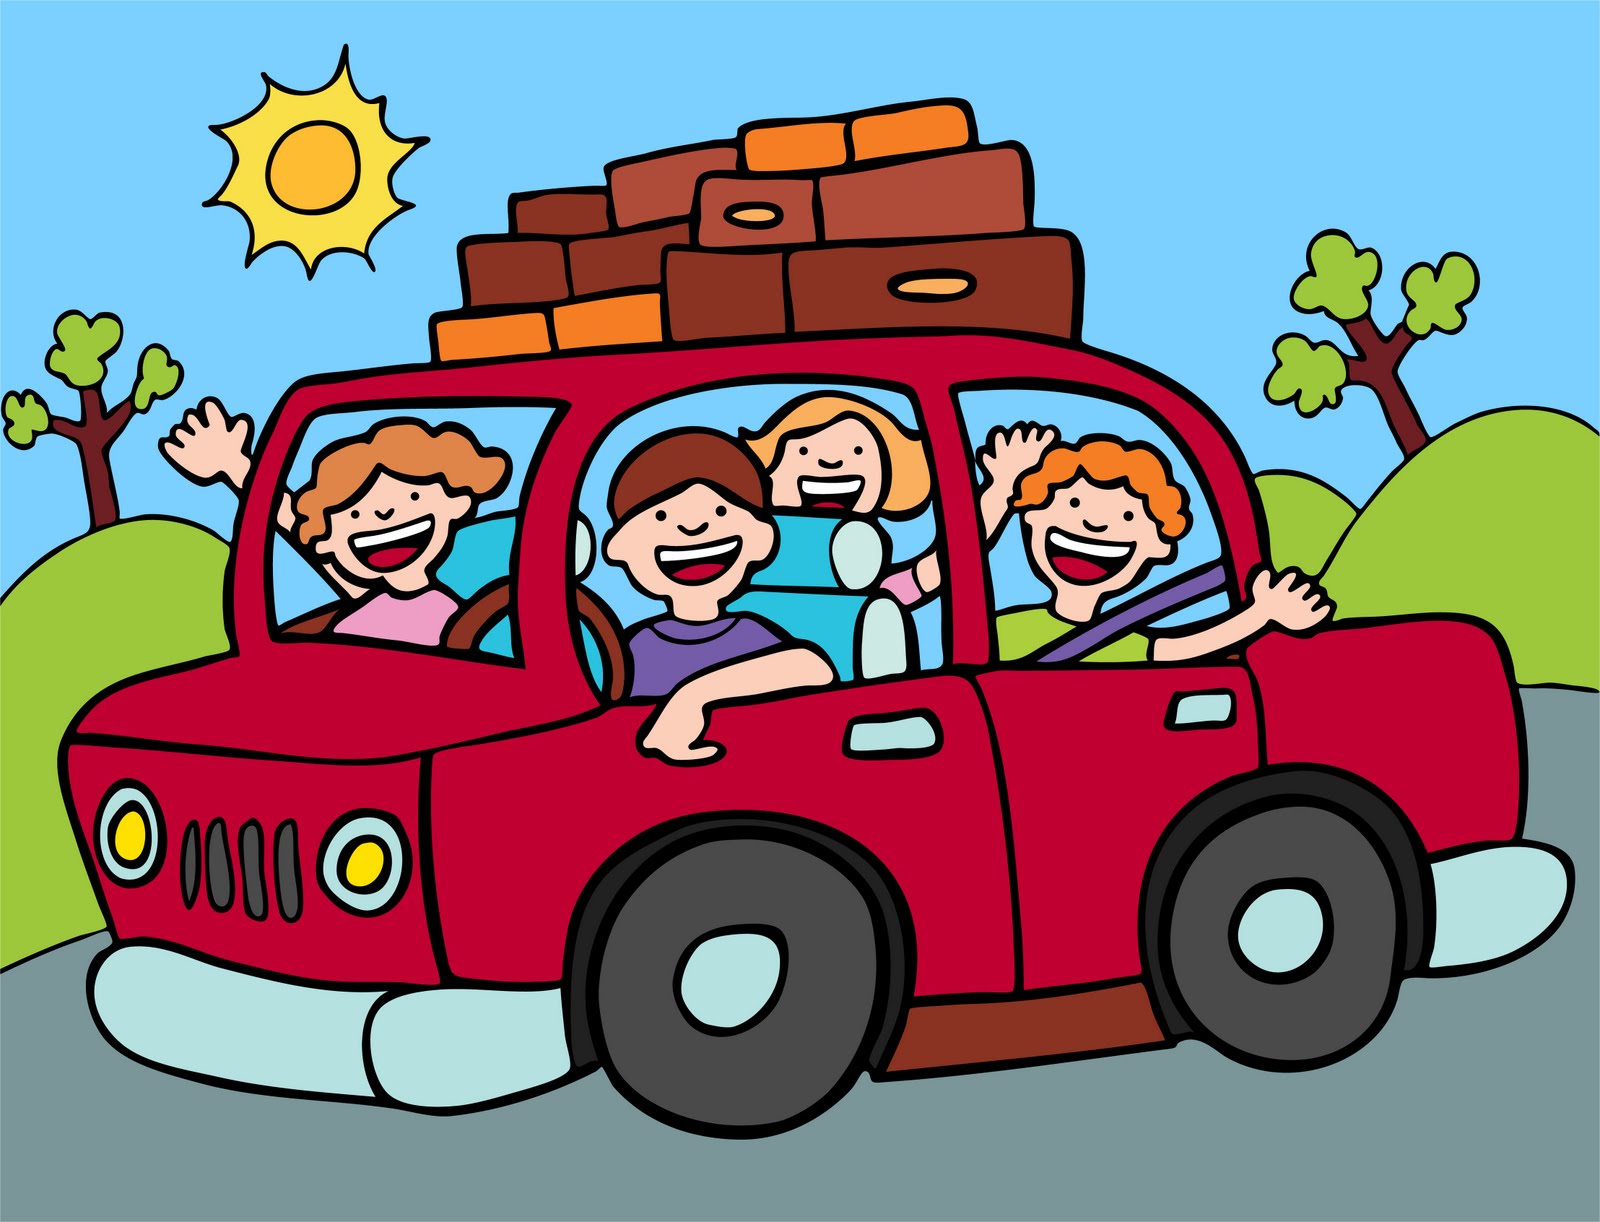 It may seem daunting, travelling with young children. How do you keep kids entertained on road trips? What better way than to learn from experienced travellers.